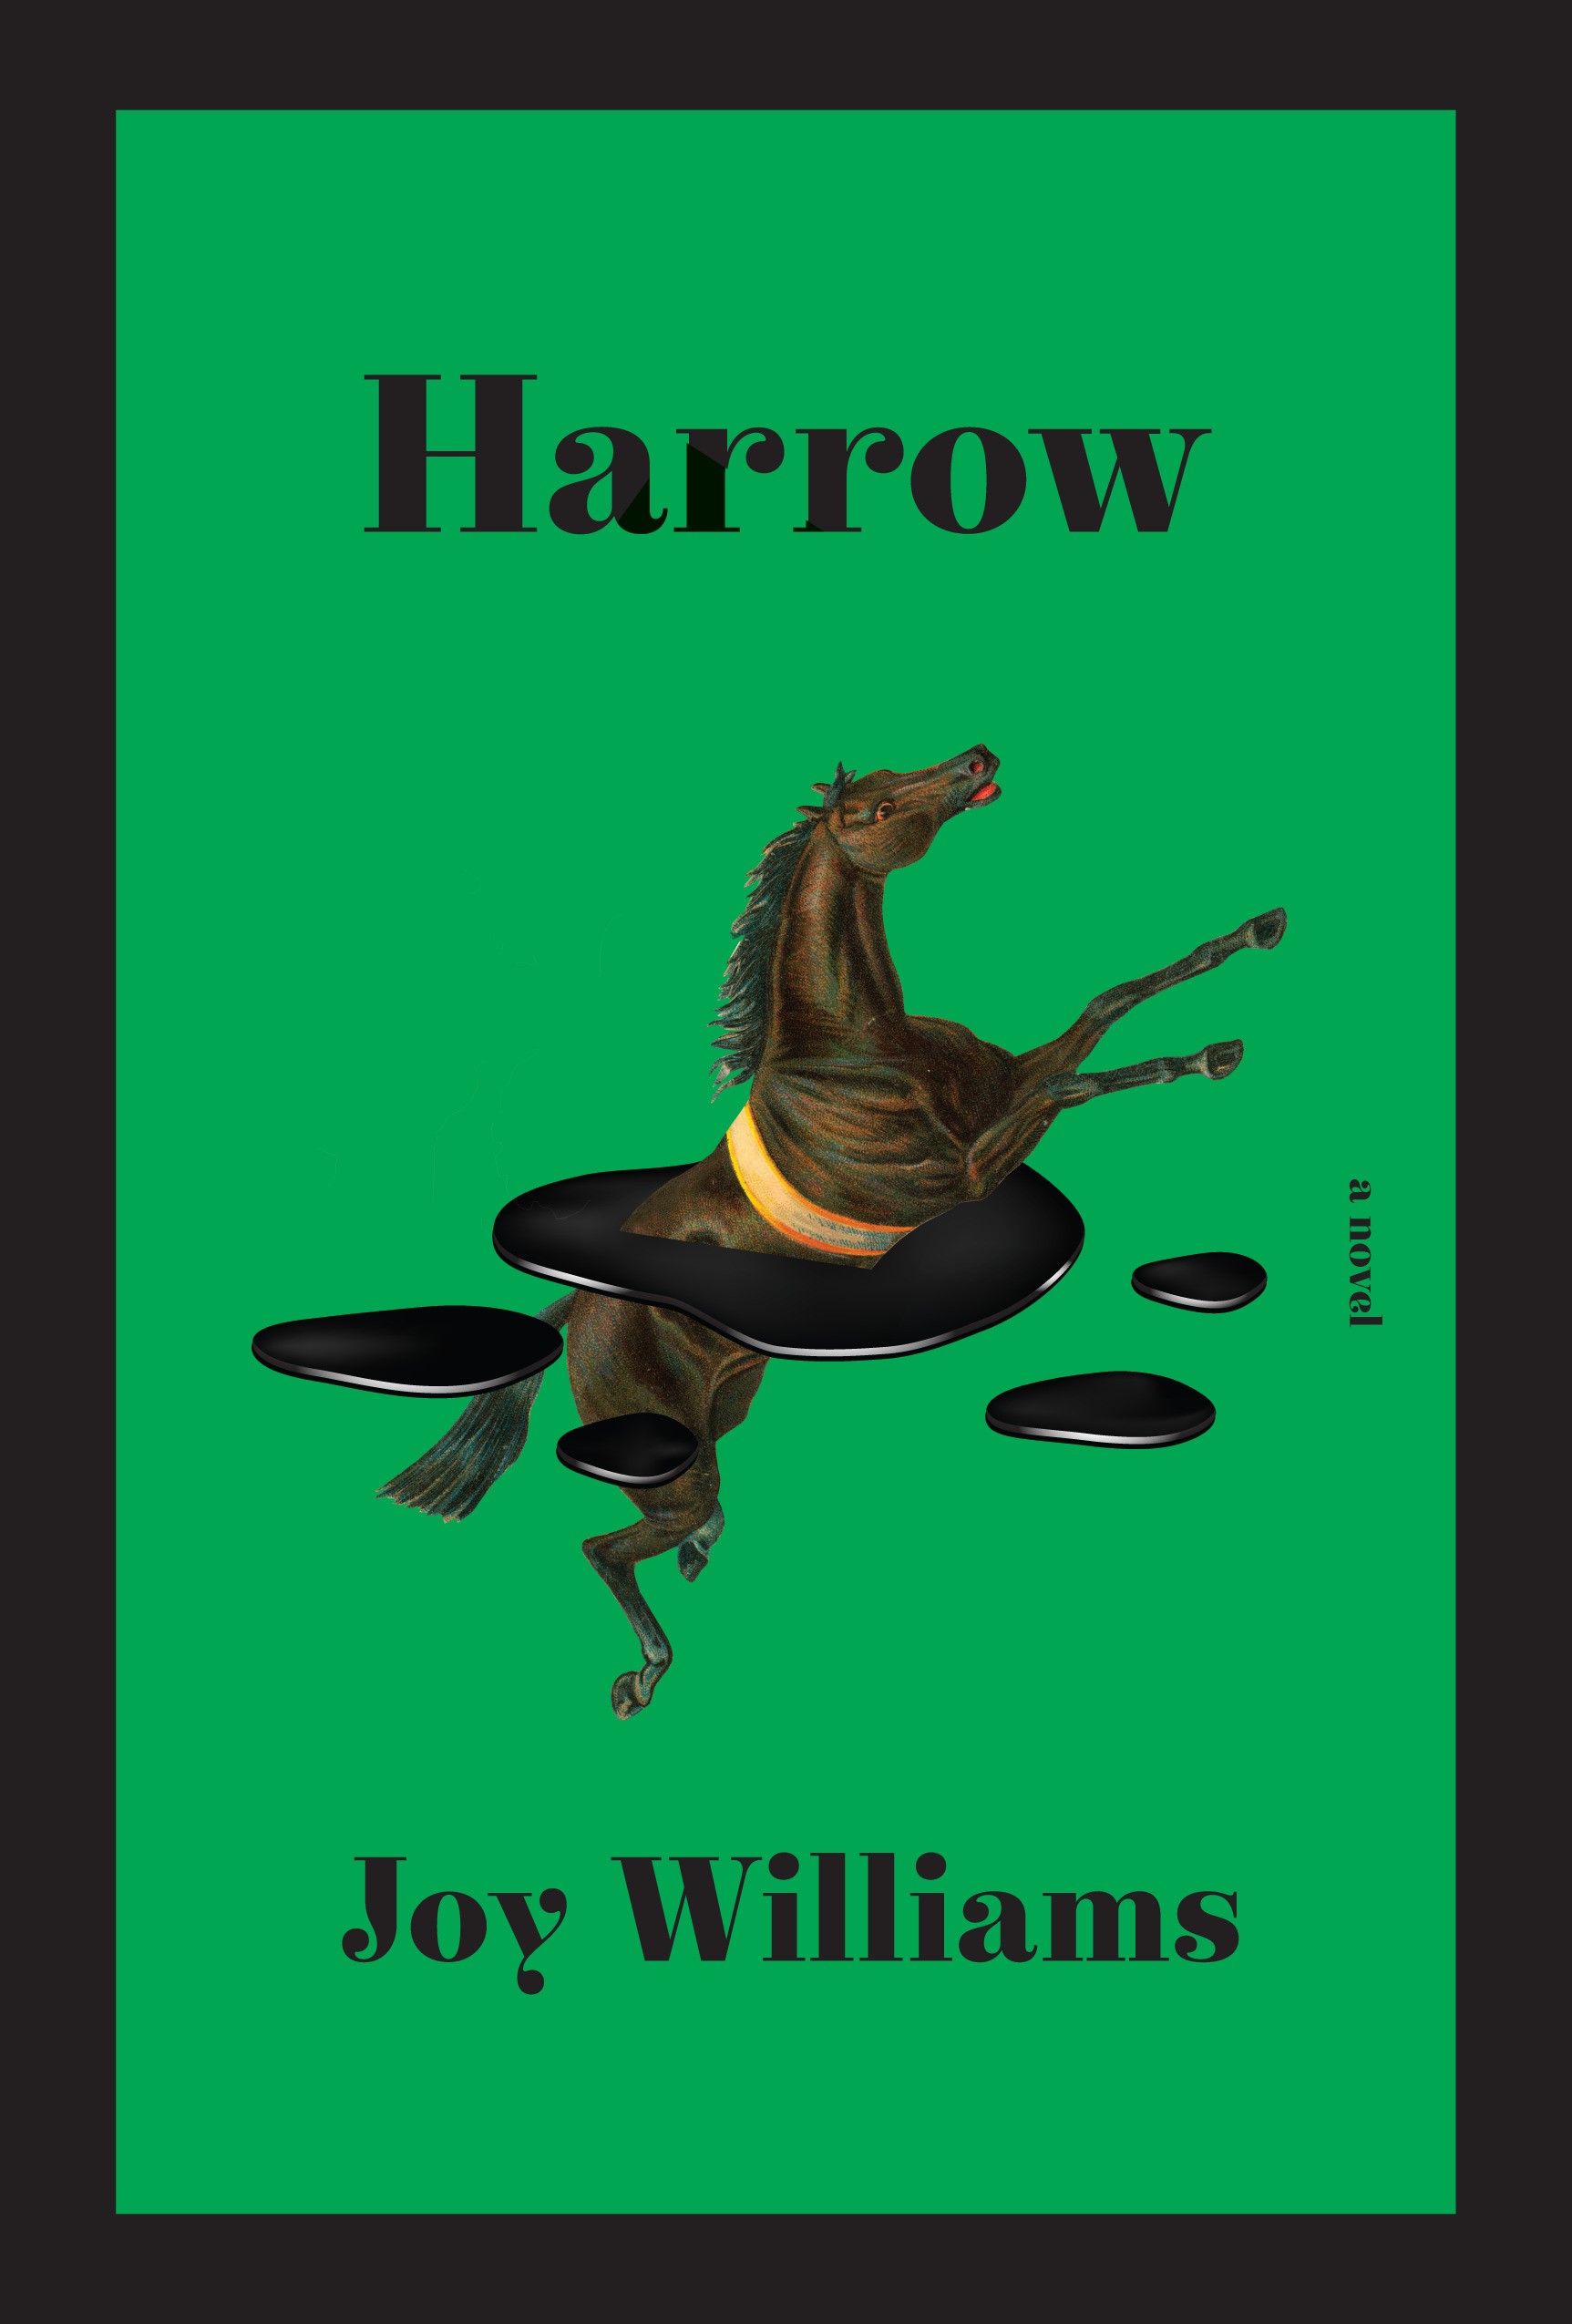 The black and green cover of "Harrow" 